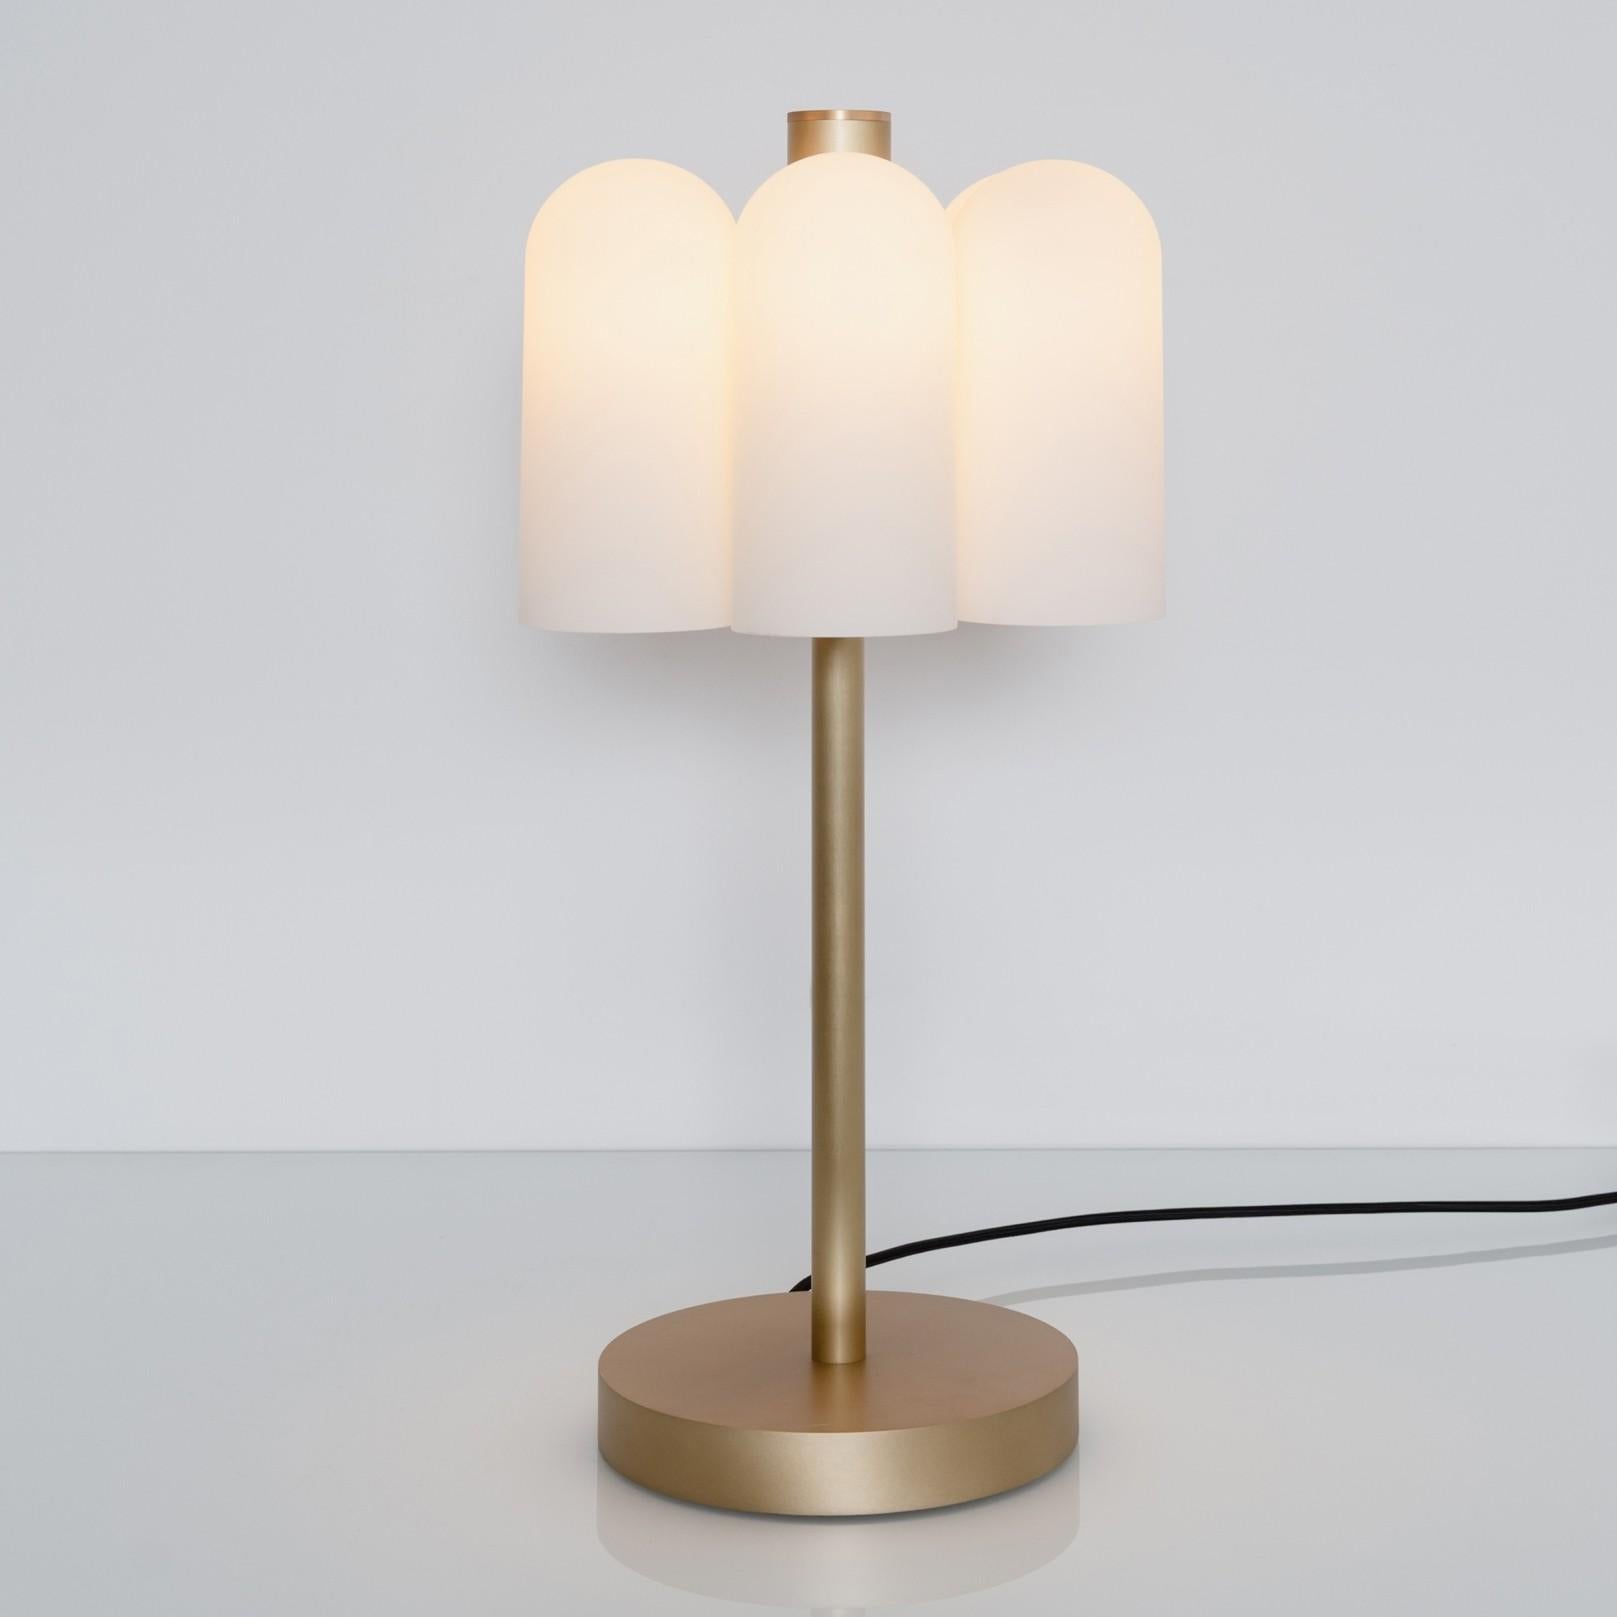 Odyssey 6 Brass Table Lamp by Schwung
Dimensions: D 31 x H 65 cm
Materials: Brass, frosted glass

Finishes available: Black gunmetal, polished nickel, brass


Schwung is a German word, and loosely defined, means energy or momentum of a positive